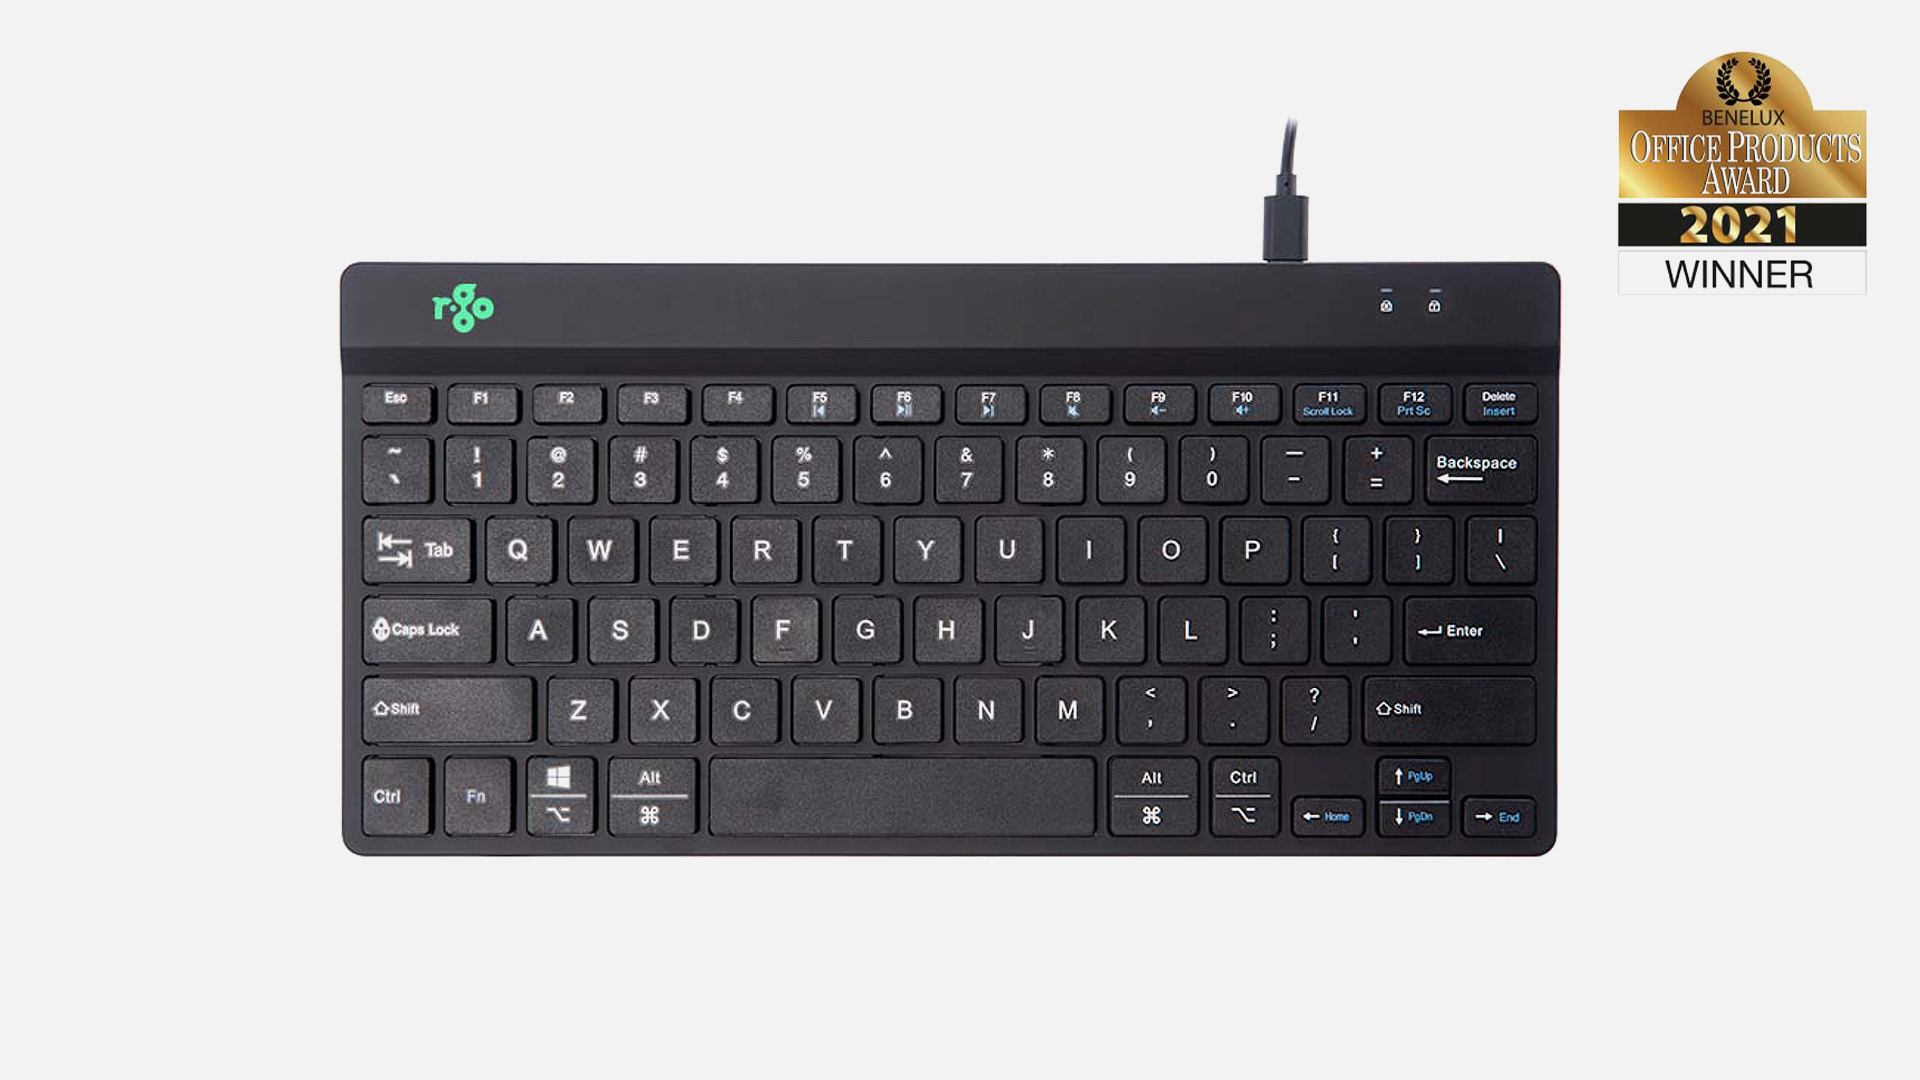 R-Go-Tools Ergonomic Break Compact Keyboard with LED Signals